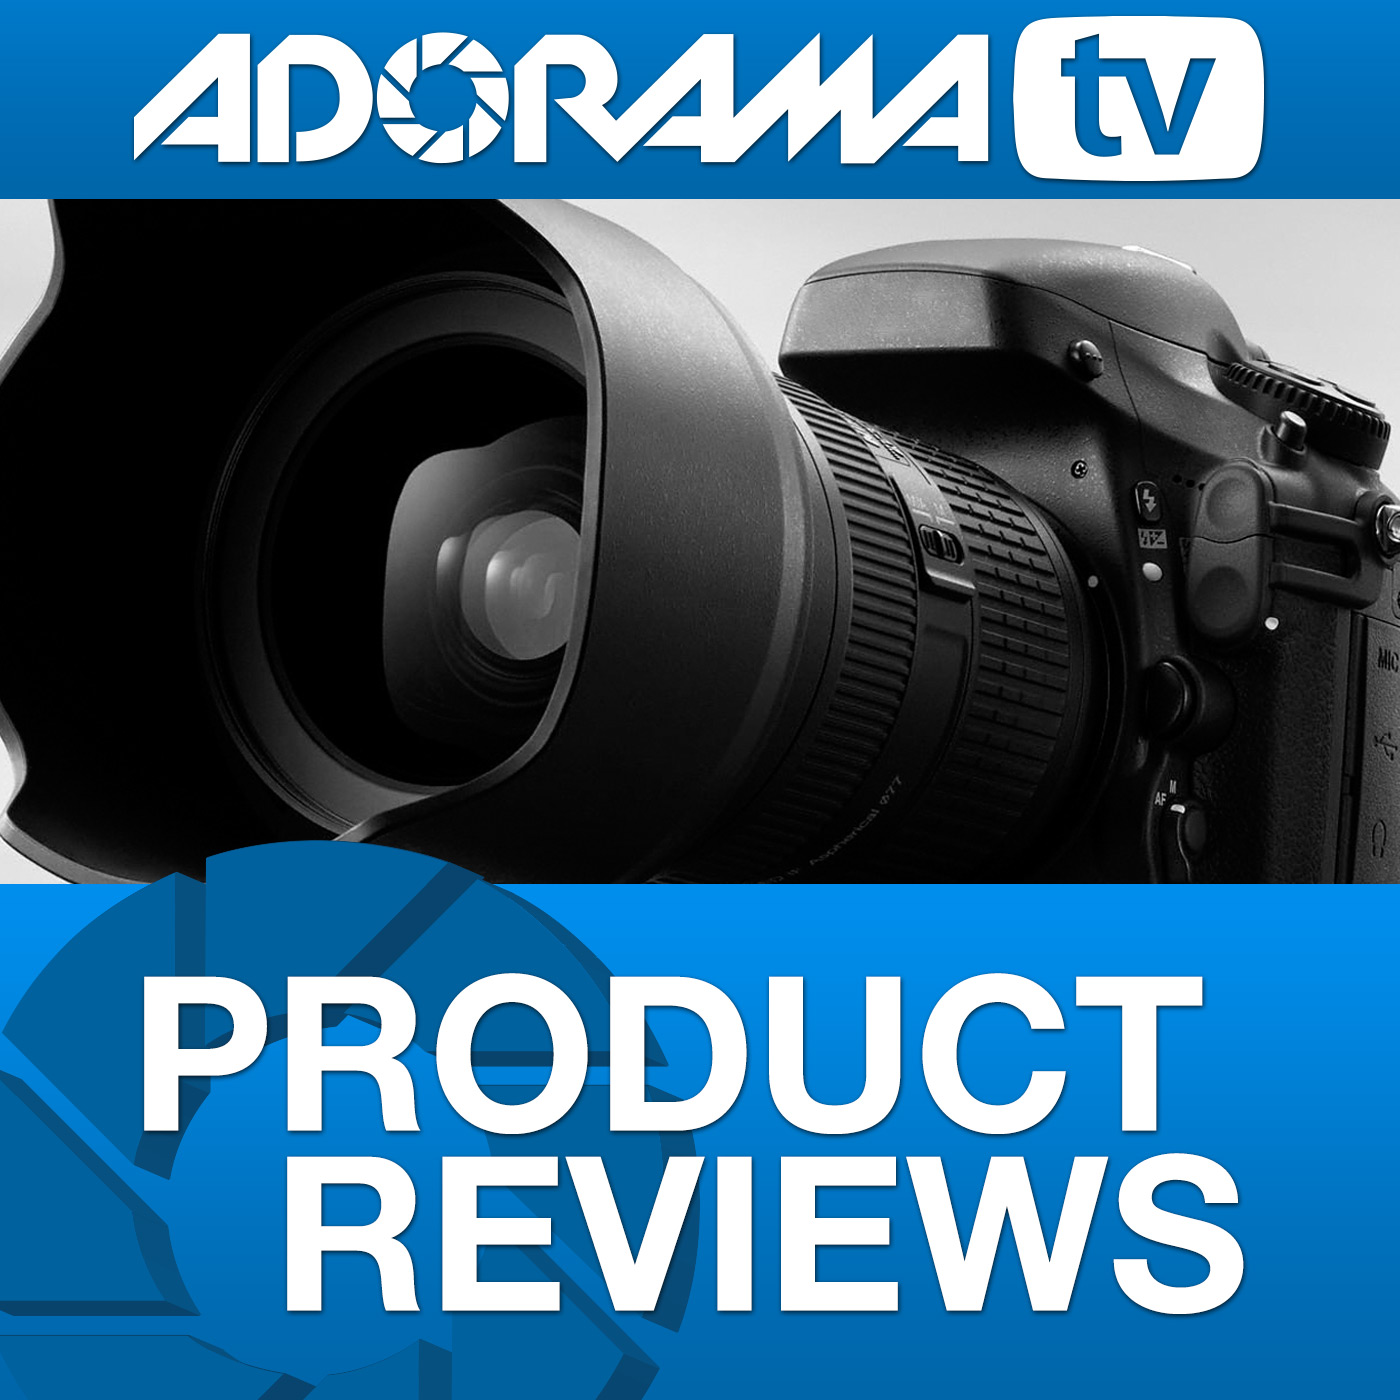 Olympus Tough TG-3 : Product Overview : Adorama TV.